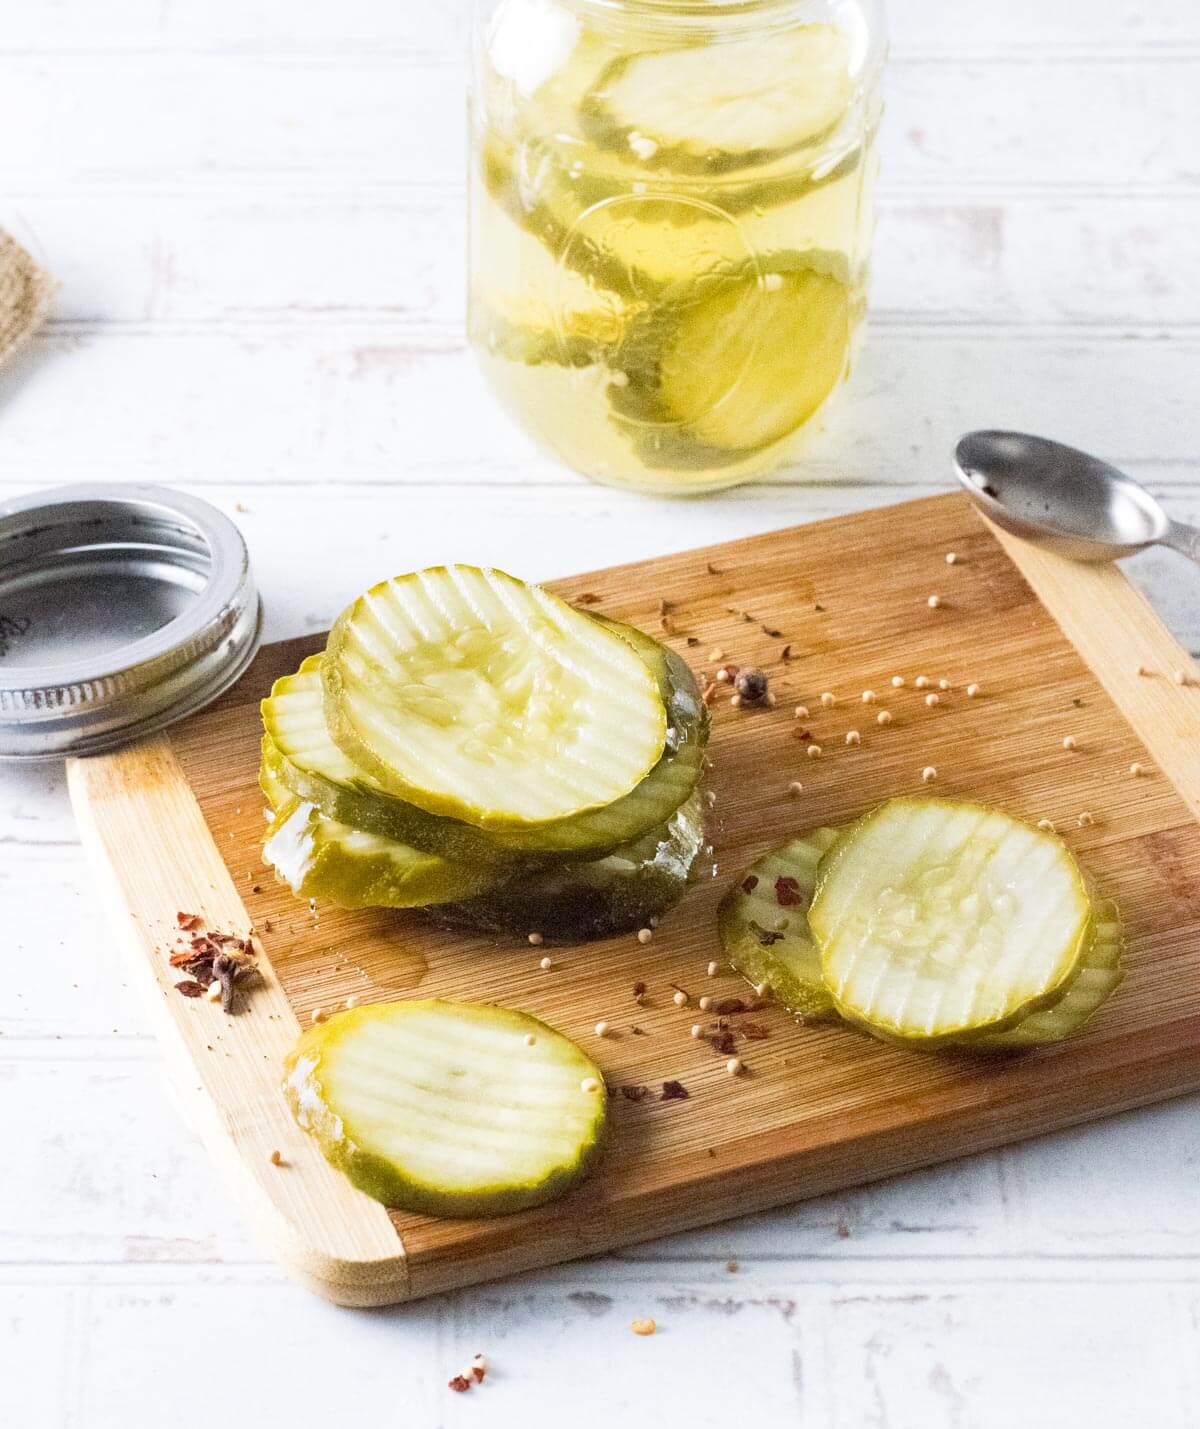 Refrigerator dill pickles on cutting board with seasonings.